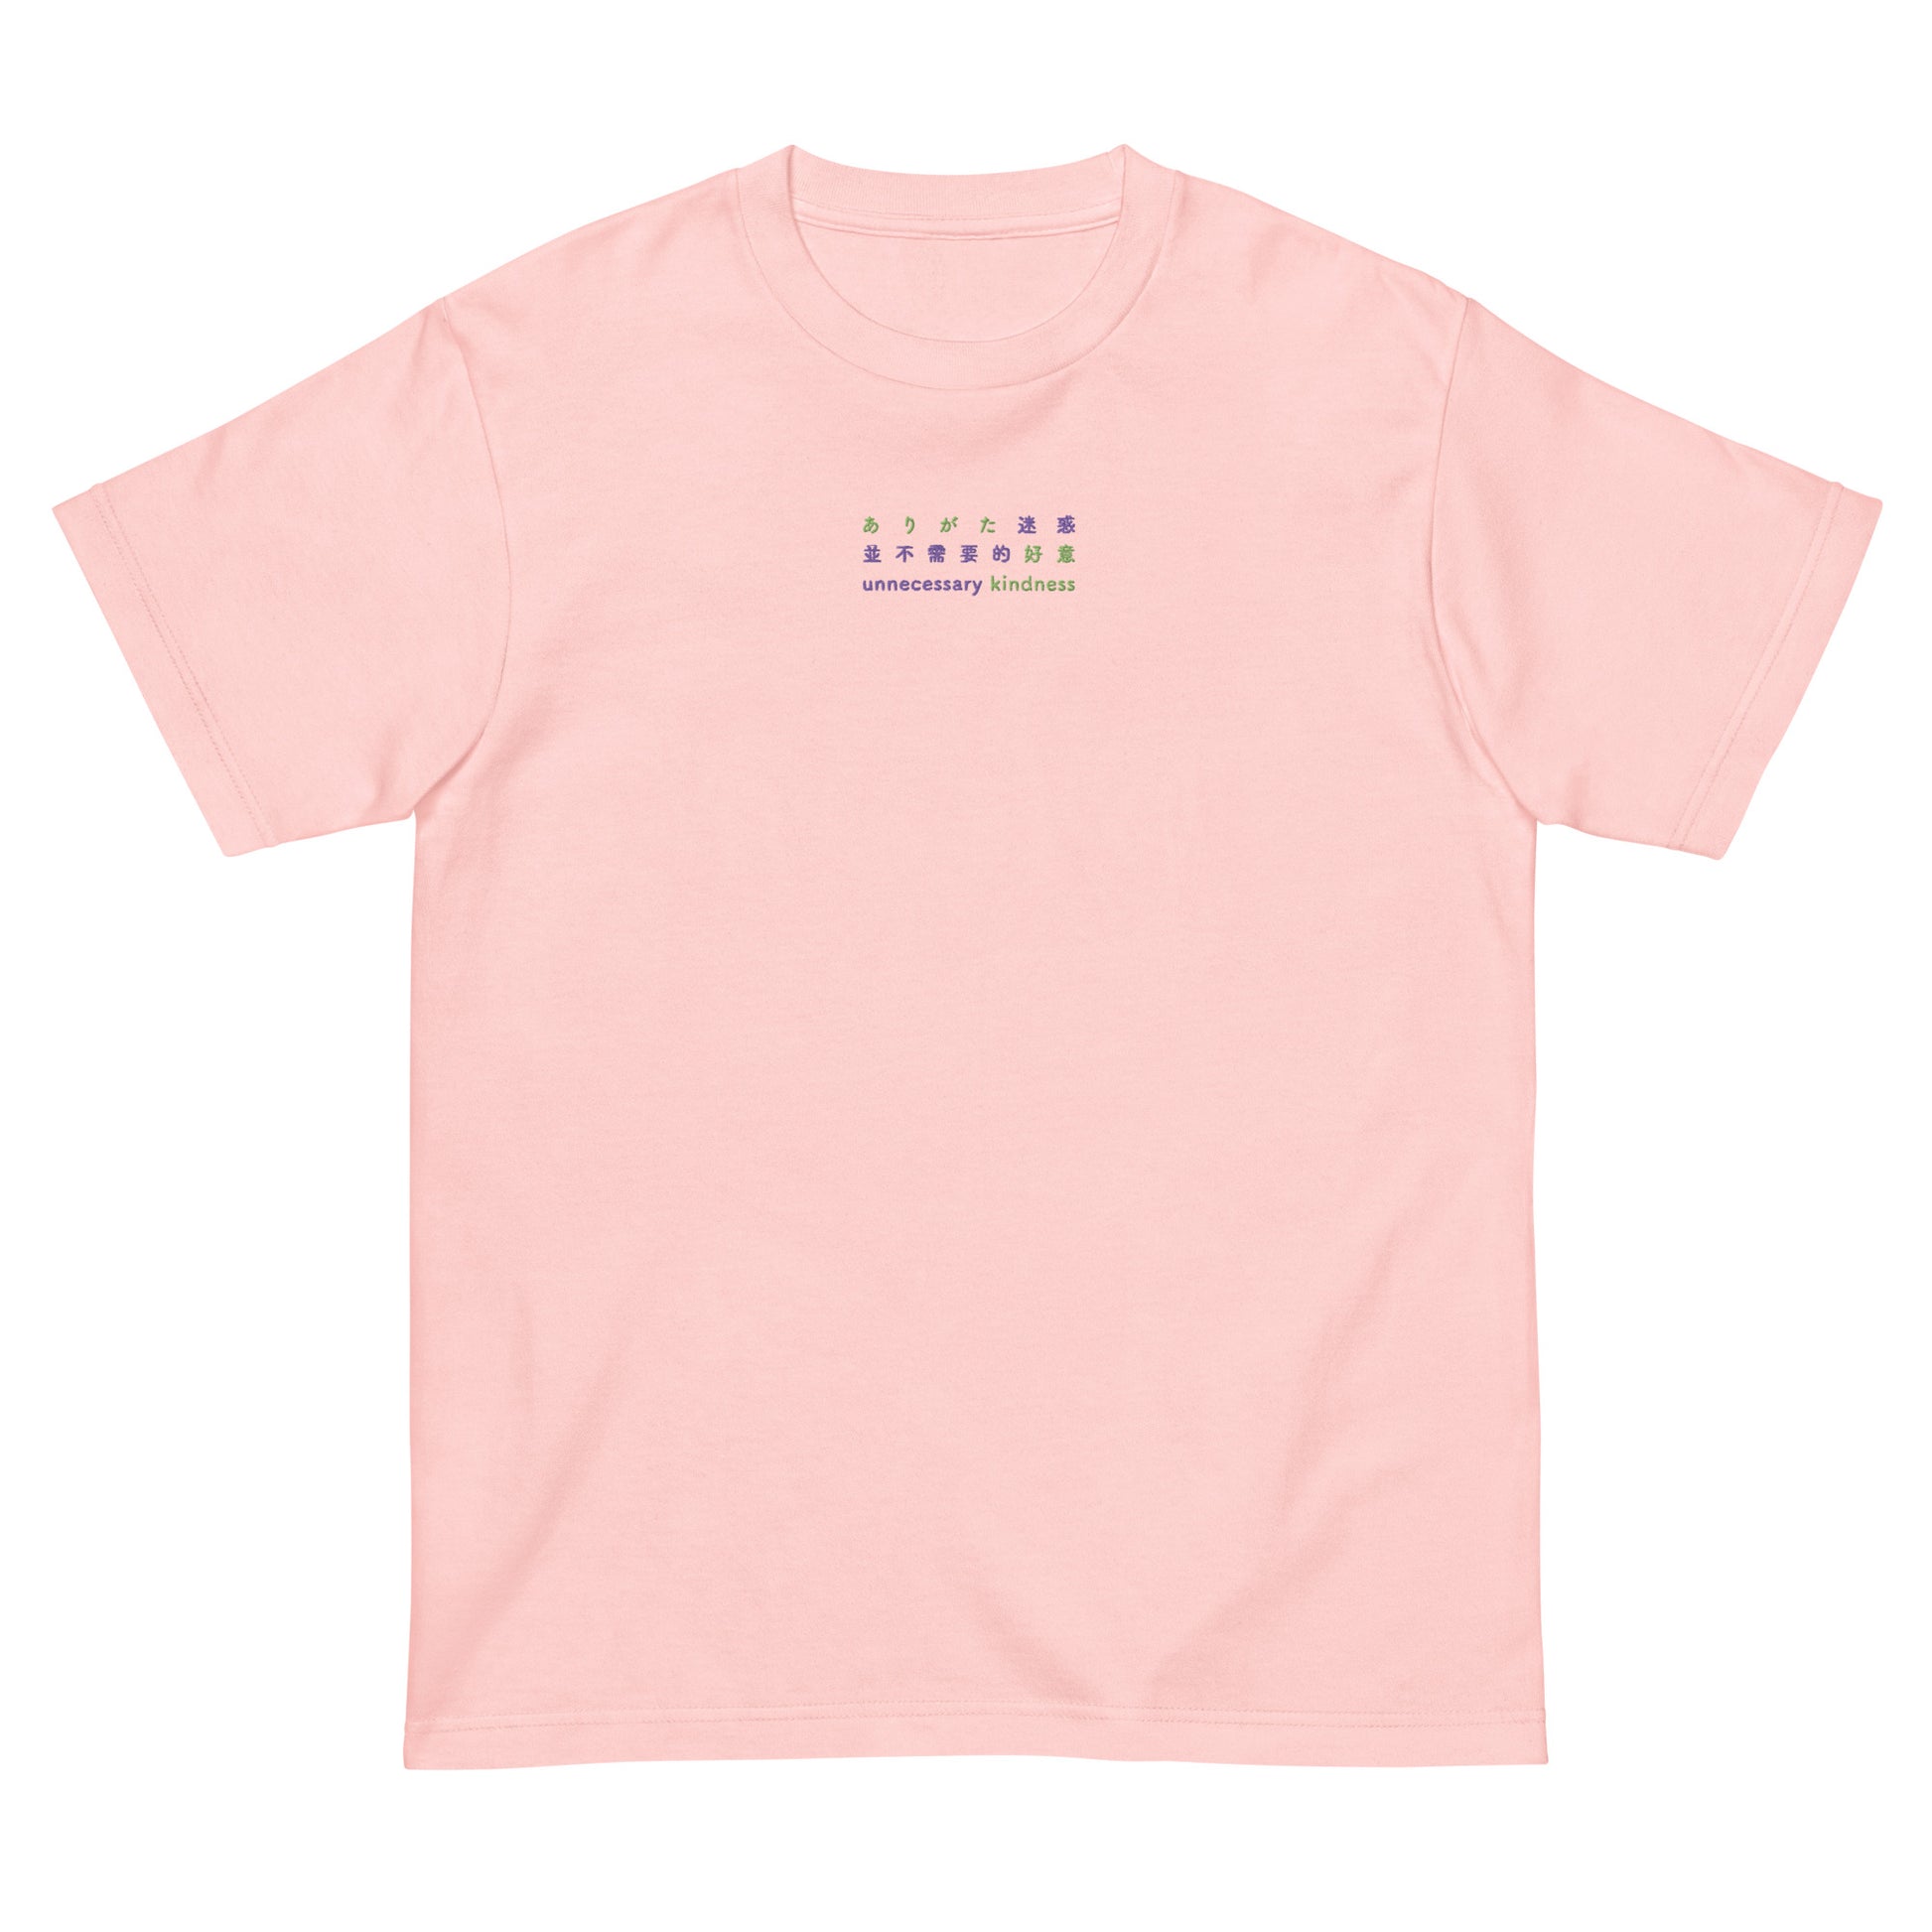 Pink High Quality Tee - Front Design with Green and Purple Embroidery "Unnecessary Kindness" in Japanese ,Chinese and English